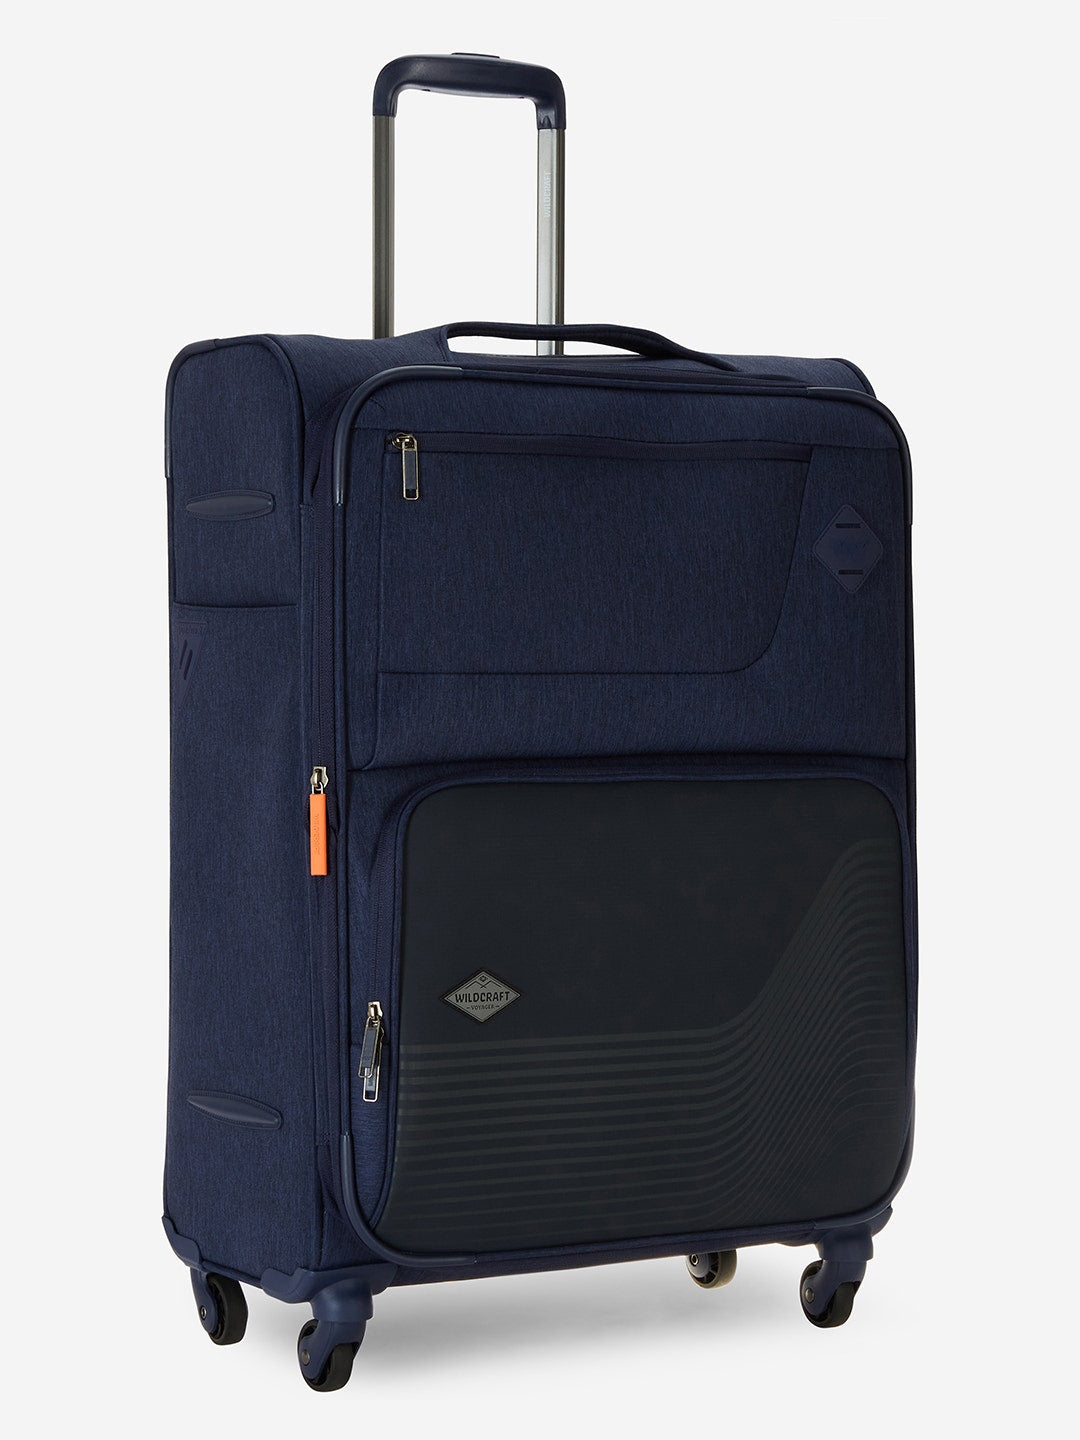 WILDCRAFT VOYAGER DUFFLE TROLLEY in bulk for corporate gifting | Wildcraft  Trolley Bag, Suitcase wholesale distributor & supplier in Mumbai India